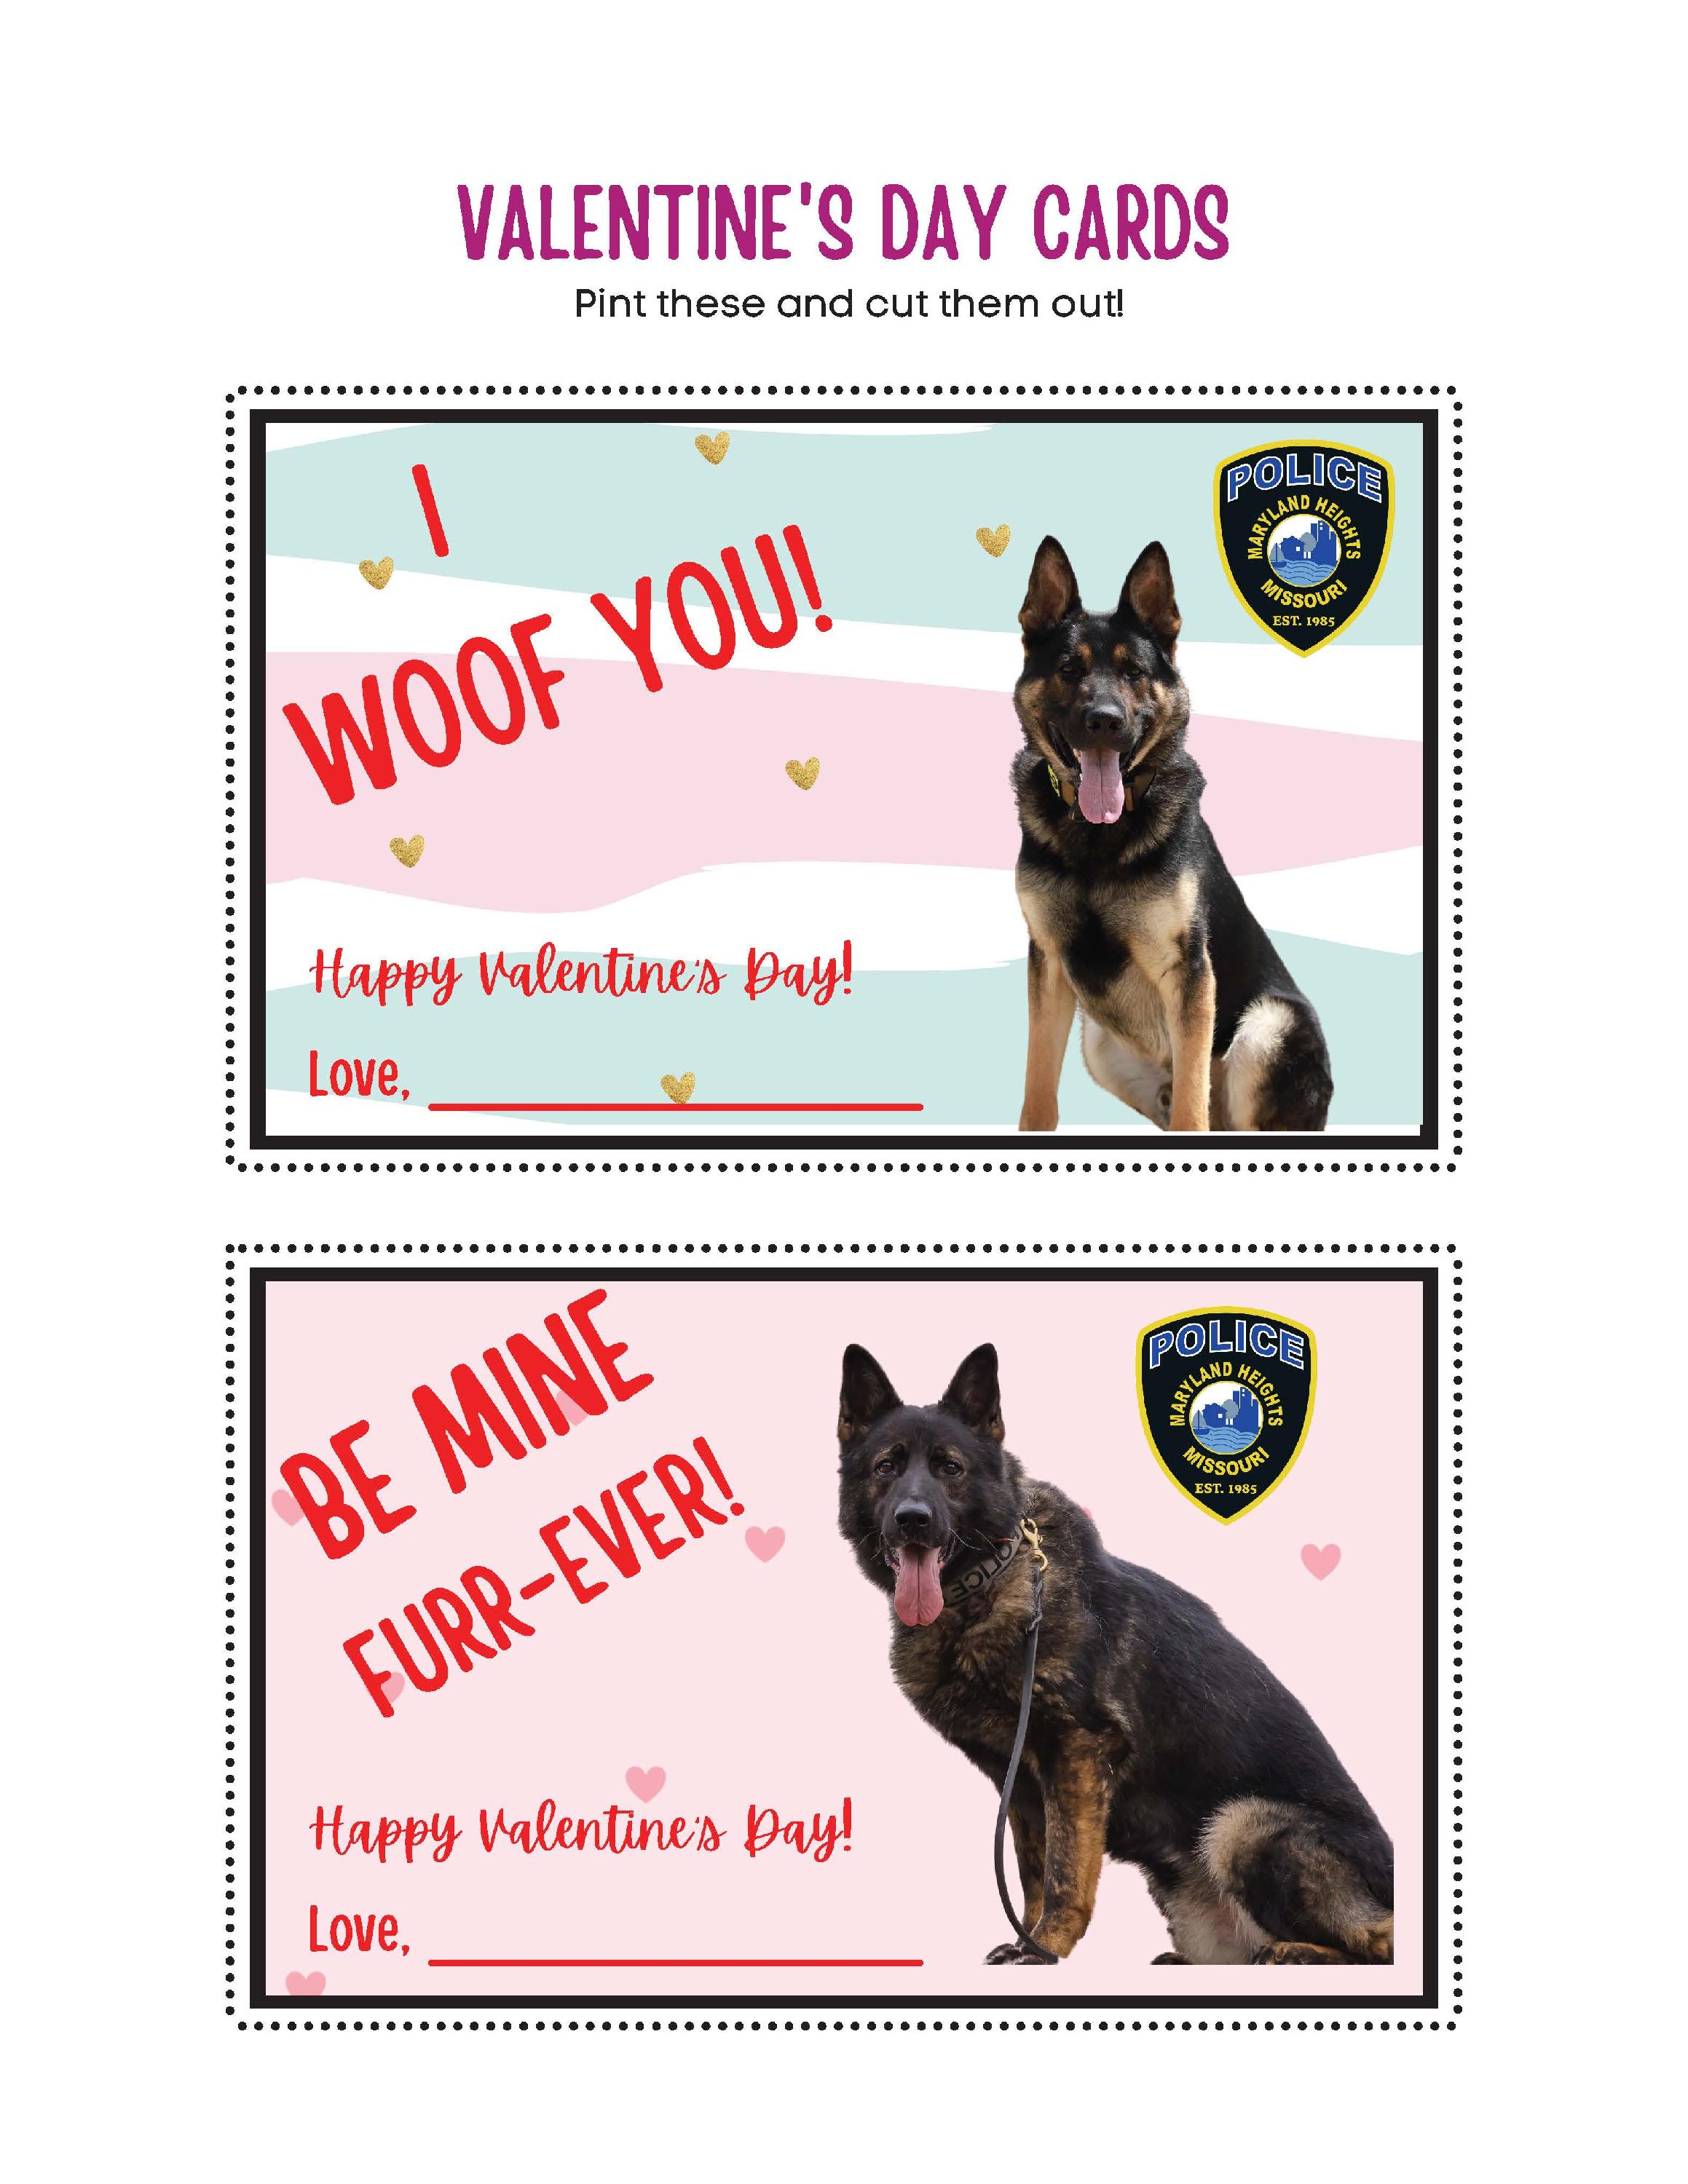 Police Department Valentines I woof you and Be mine fur ever with K9 units